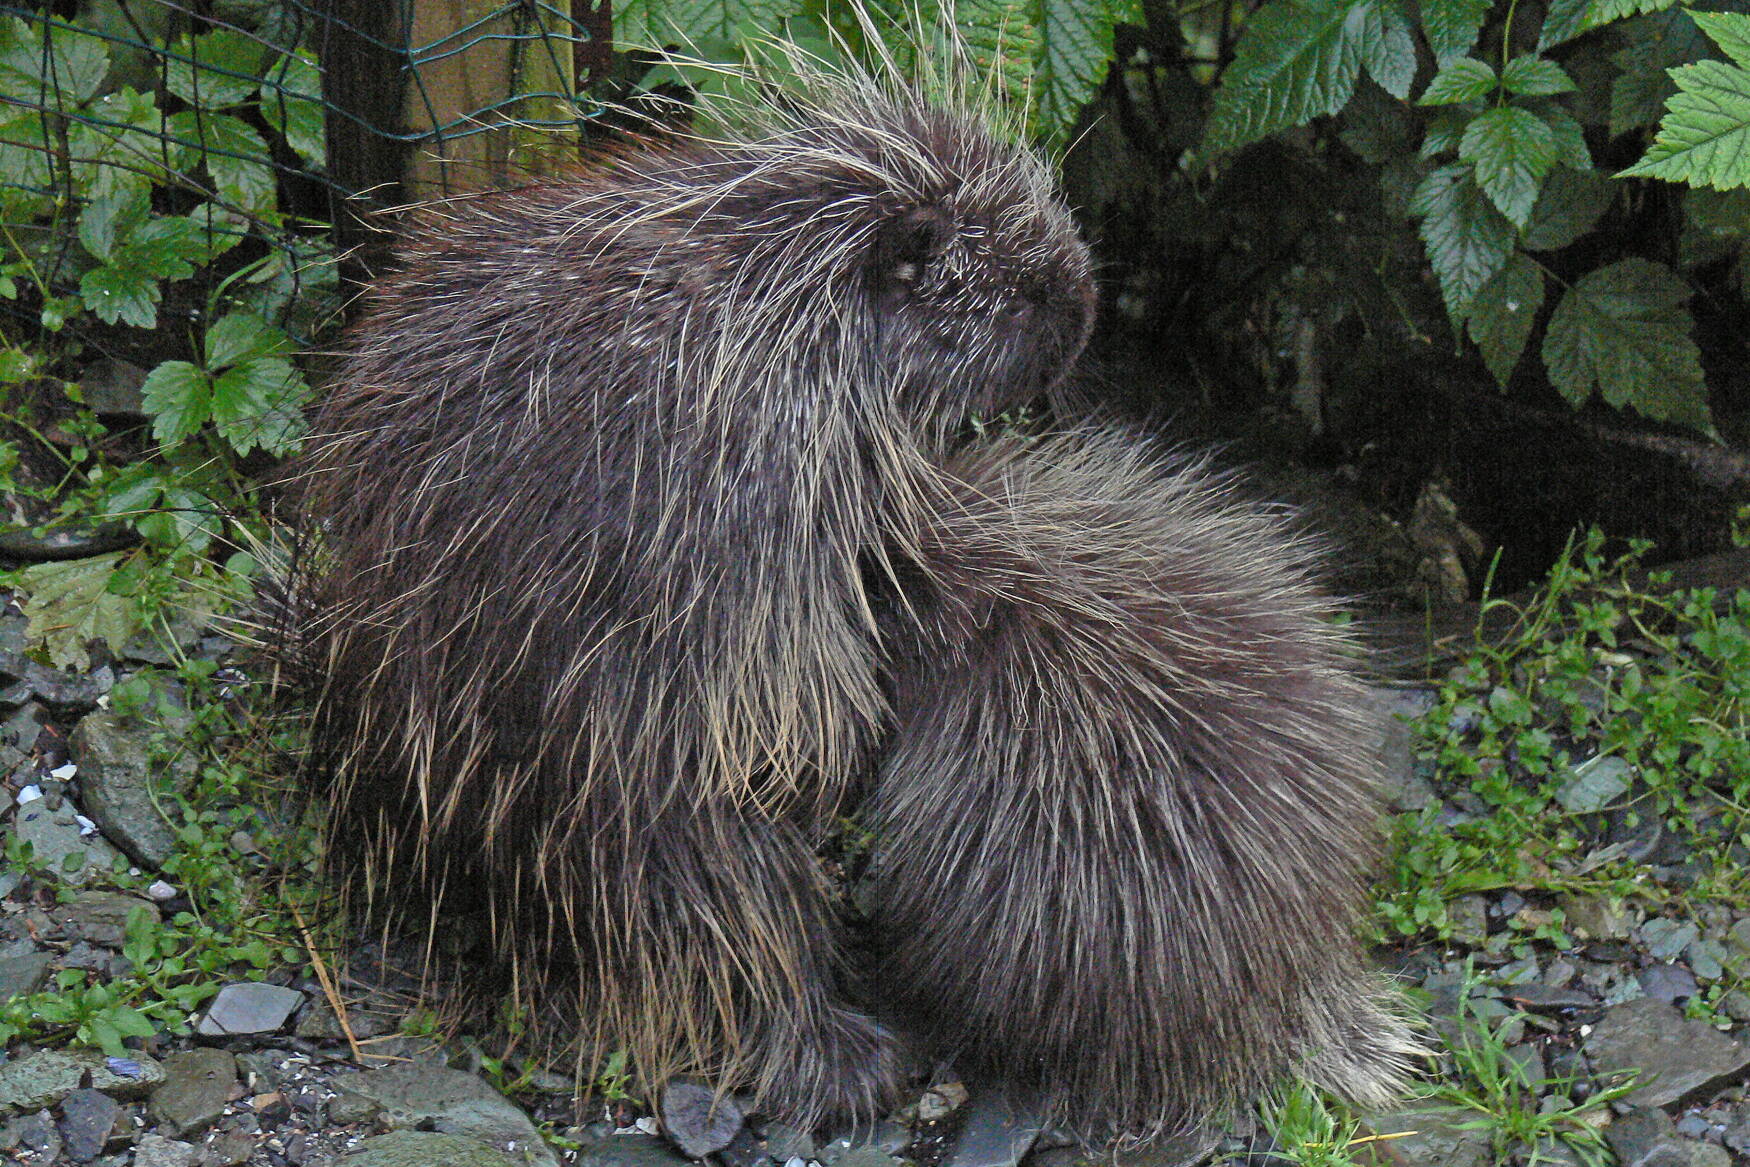 A porcupine nurses its young one, providing milk. (Photo by Bob Armstong)